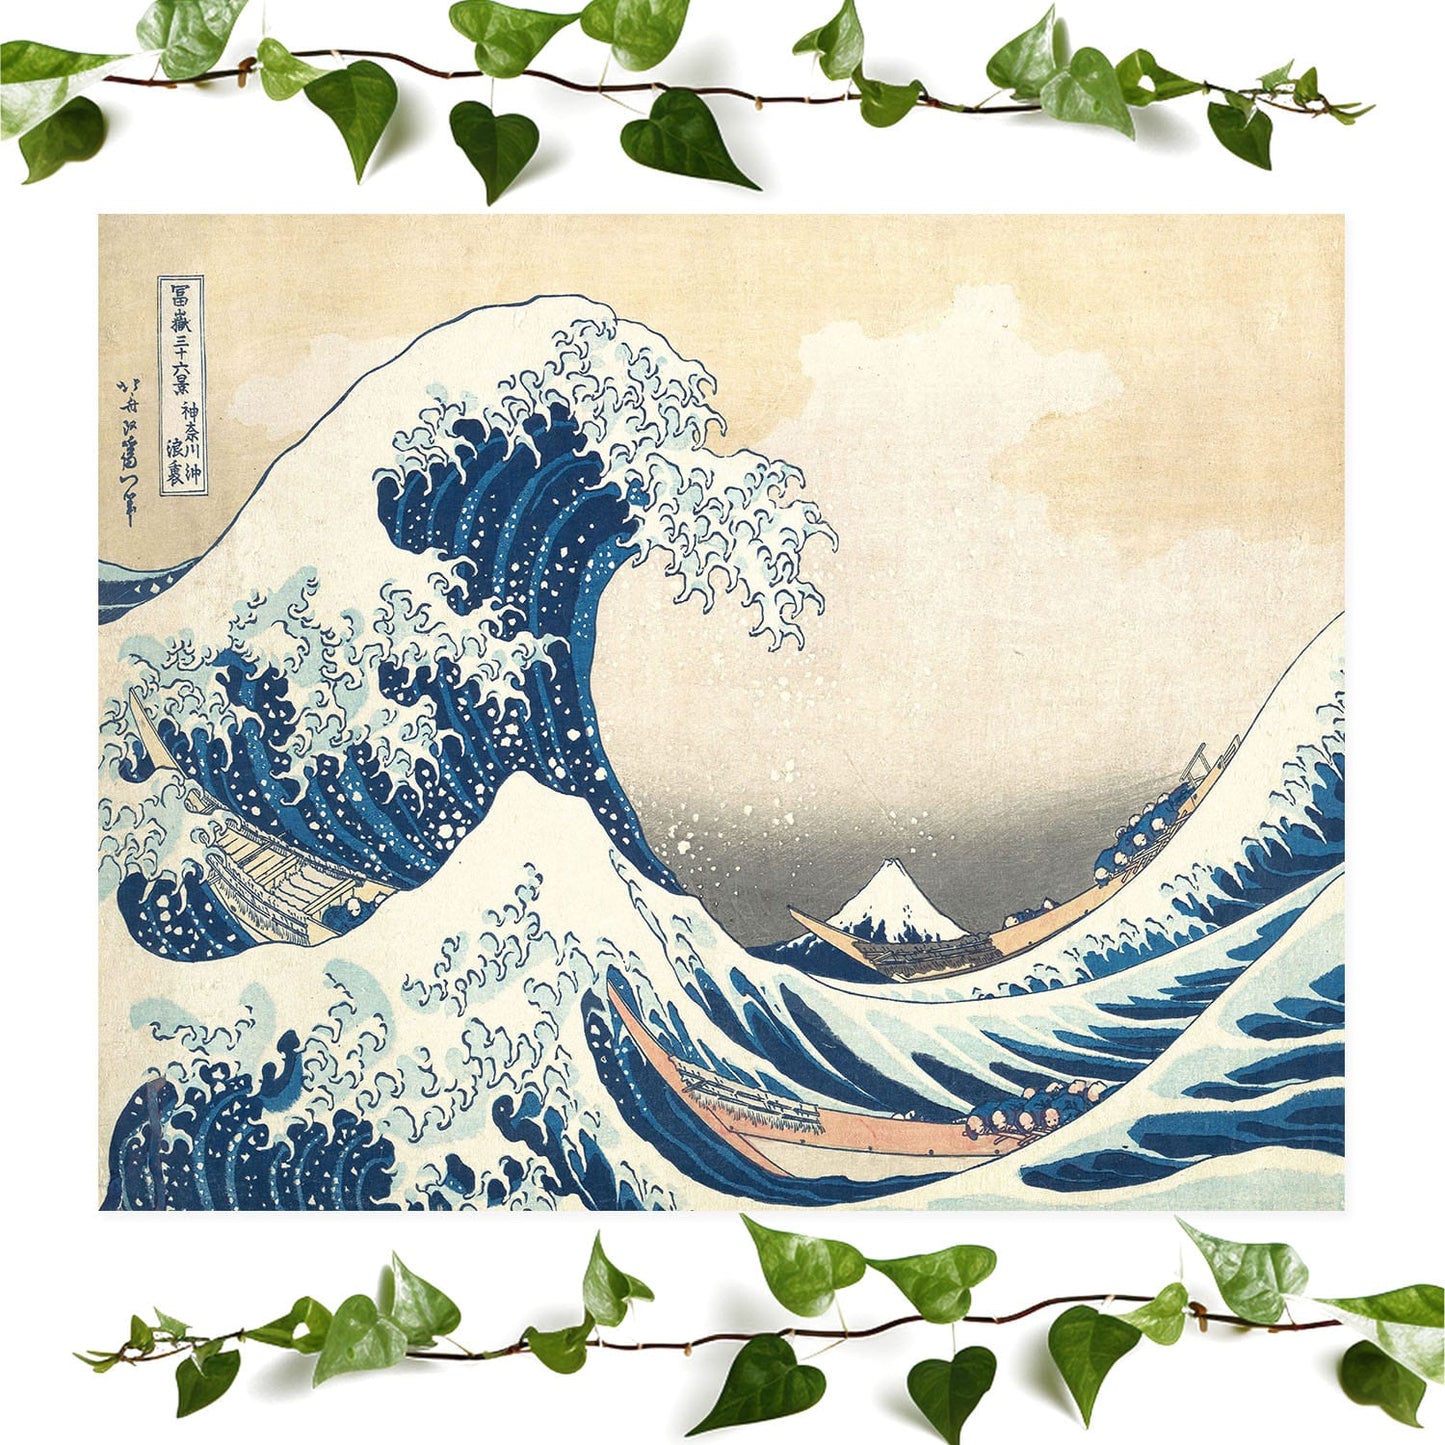 The Great Wave off Kanagawa art prints featuring a big wave poster, vintage wall art room decor